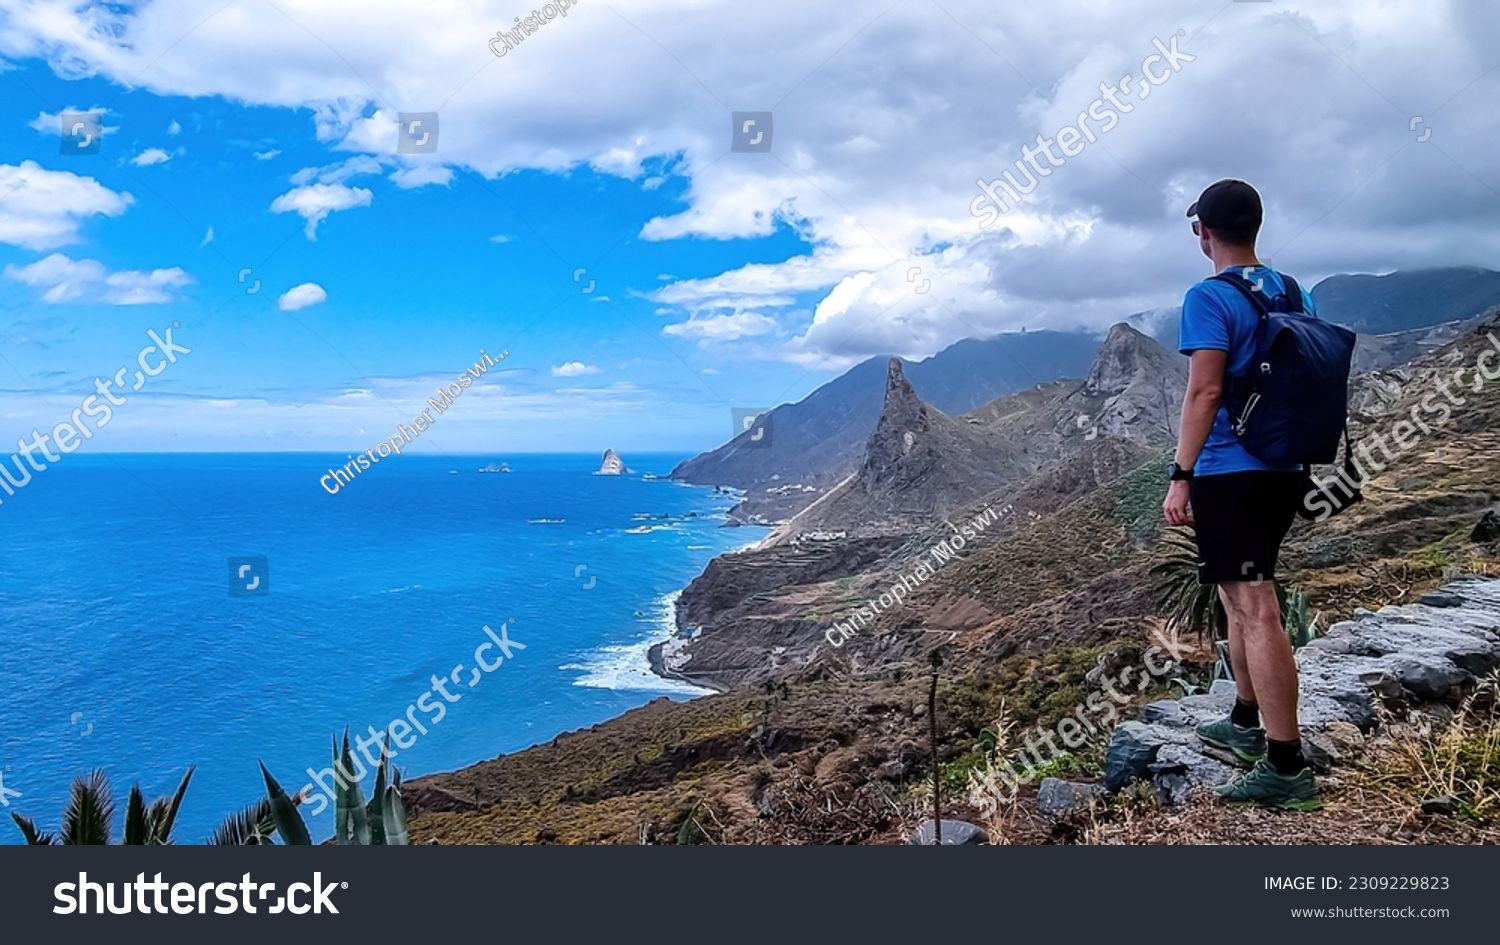 Backpack man with scenic view of Atlantic Ocean coastline and Anaga mountain range on Tenerife, Canary Islands, Spain, Europe. Looking at Roque de las Animas crag. Hiking trail from Afur to Taganana #2309229823